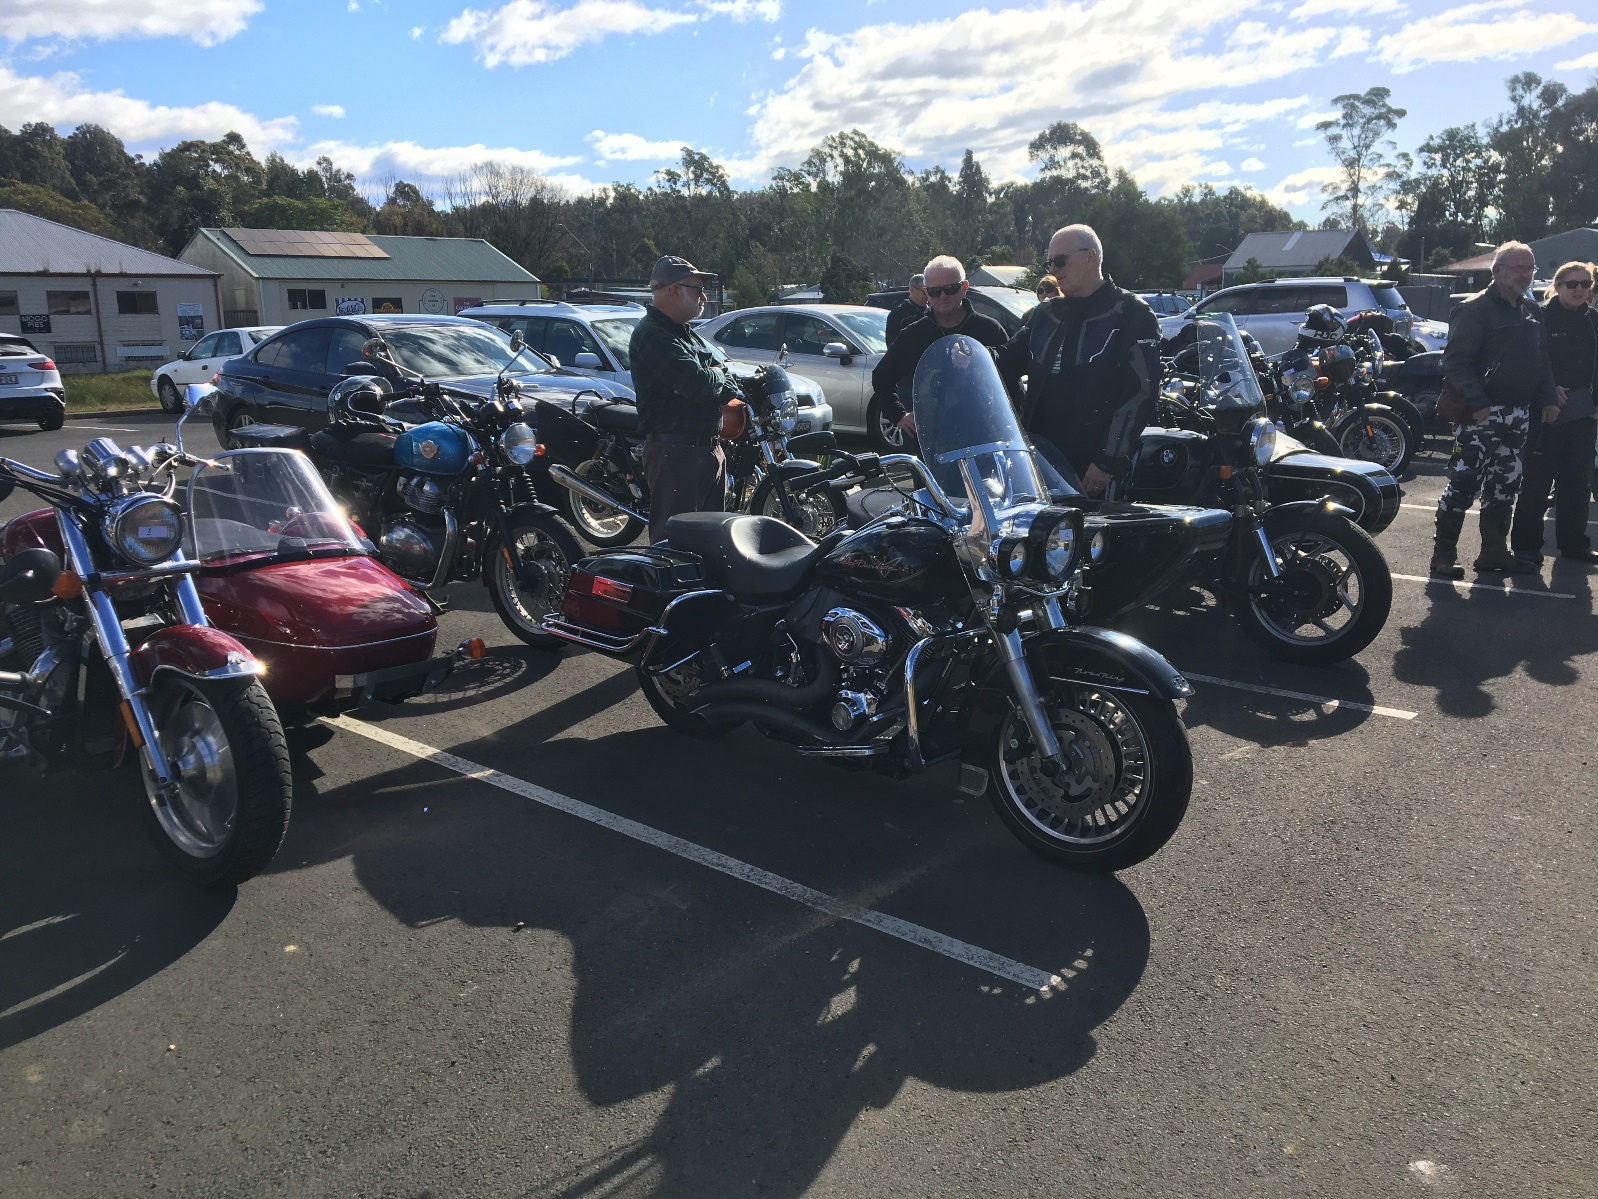 A group of men standing next to motorcycles Description automatically generated with low confidence